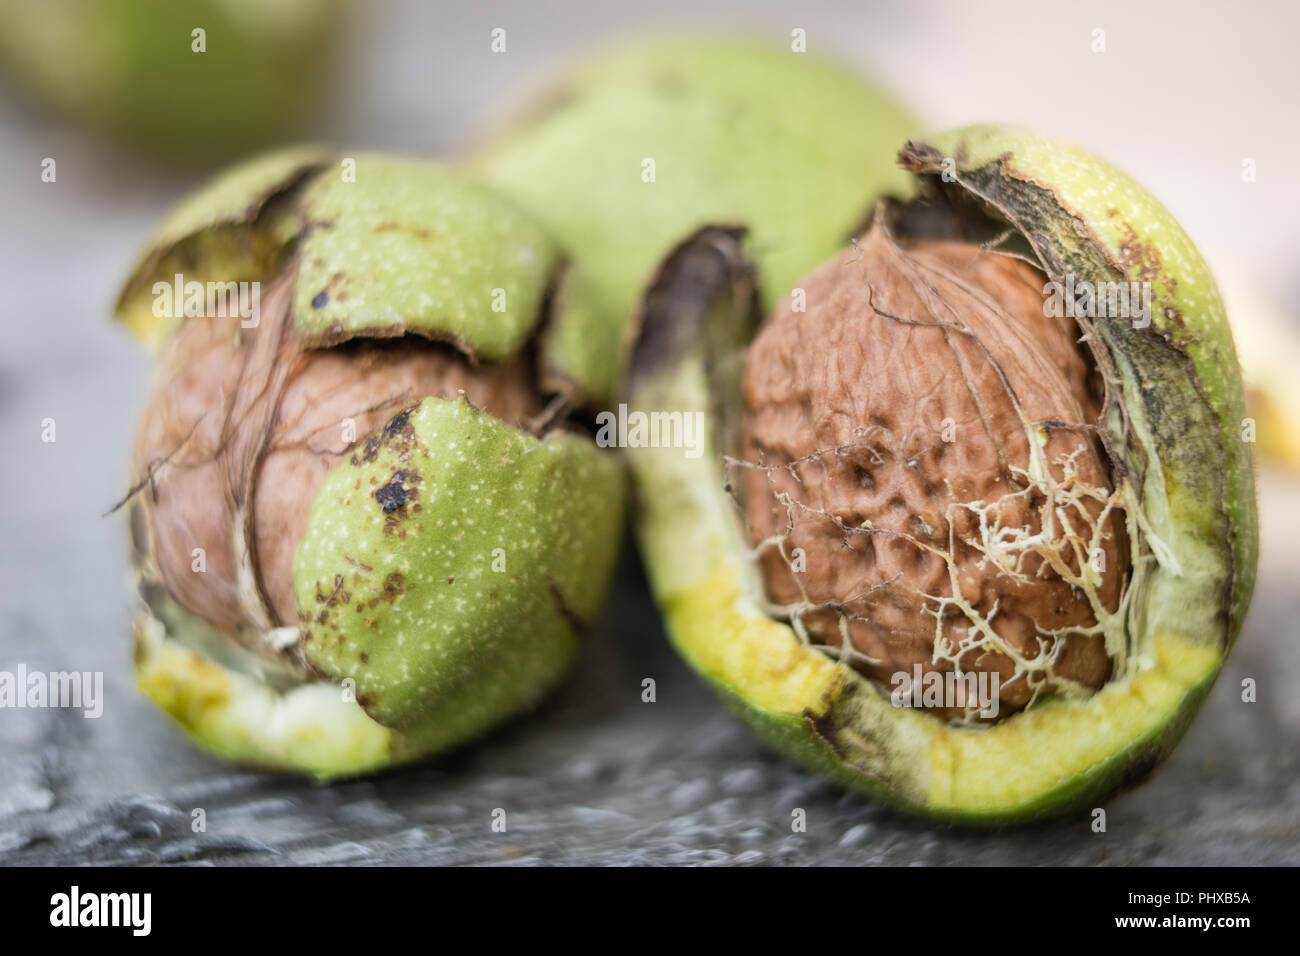 Ripening walnuts in shell. Fruit ready for harvesting on a wooden table. Season - autumn. Stock Photo